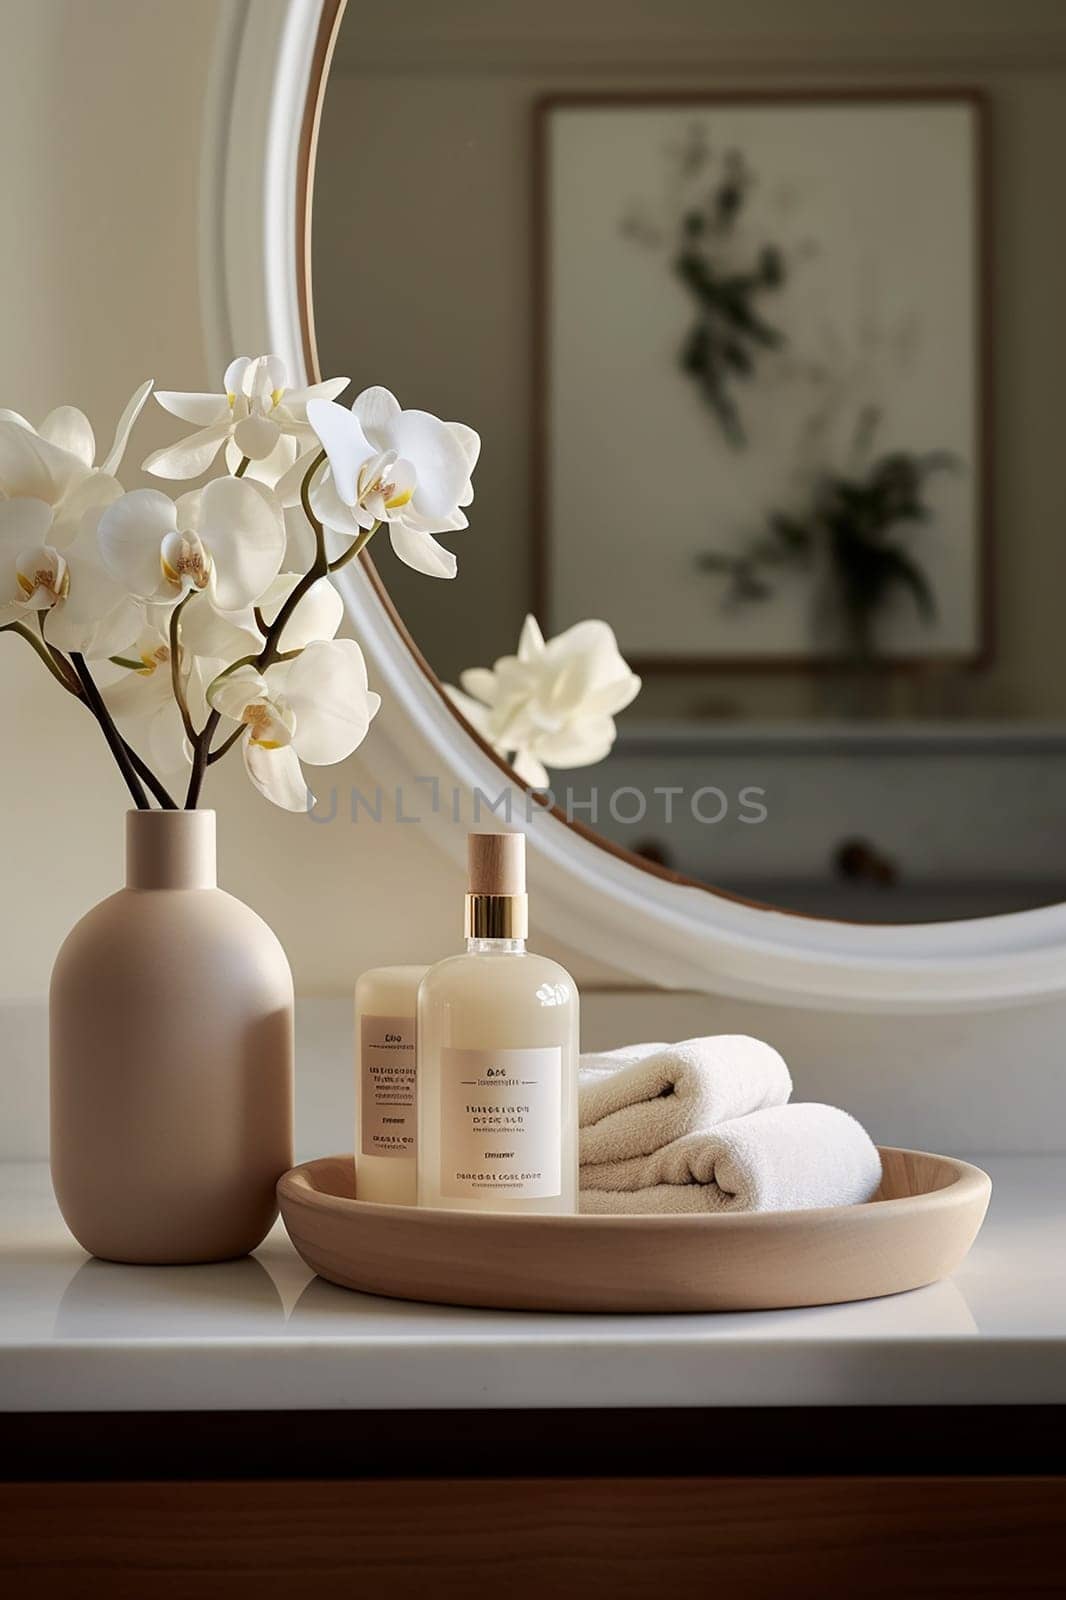 Elegant bathroom setup with orchids and wellness products reflecting tranquility.